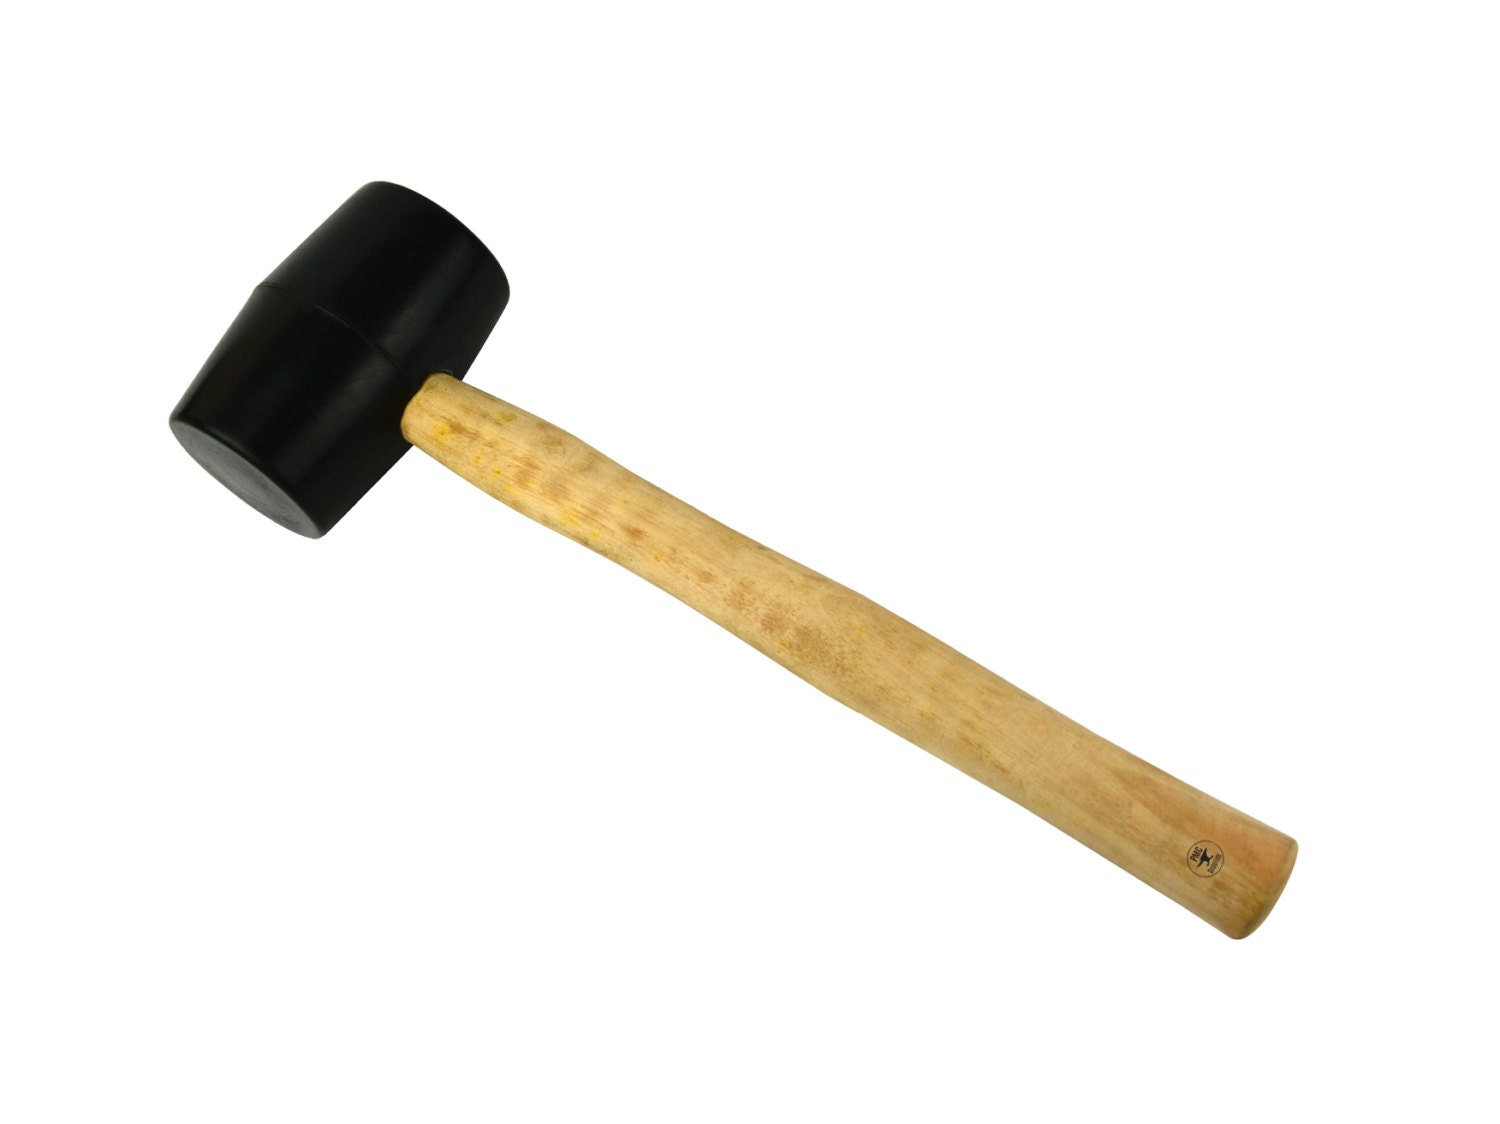 13-1/2 Rubber Head Mallet W/ Wooden Mallet 16 Oz Jewelry Stamping Metal  Forming Tool HAM-0026 